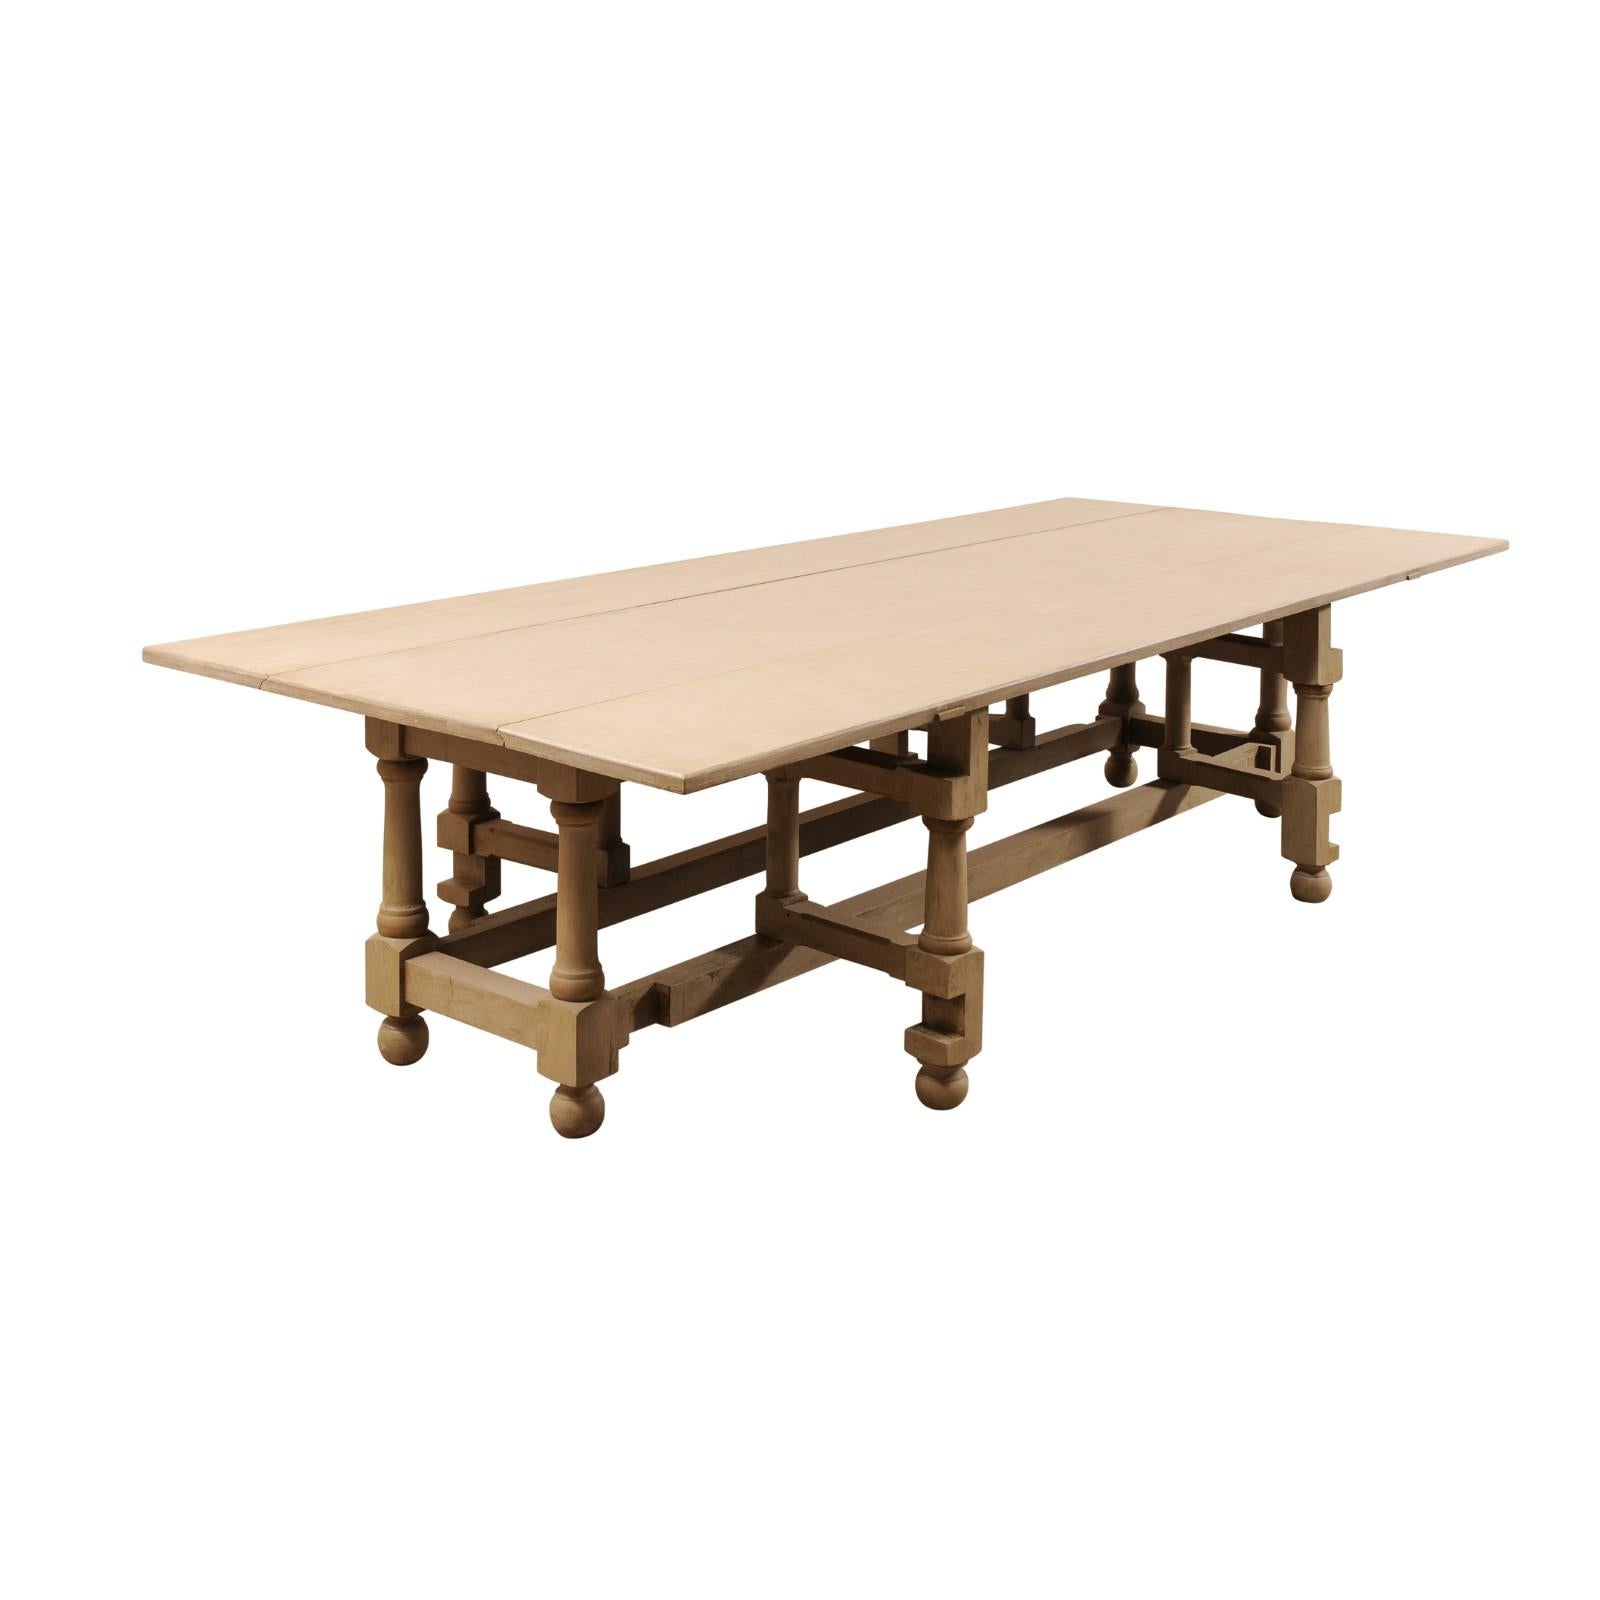 10.5 Ft. Painted Poplar Wood Gate-Leg Dining Table or Great Over-Sized Console 